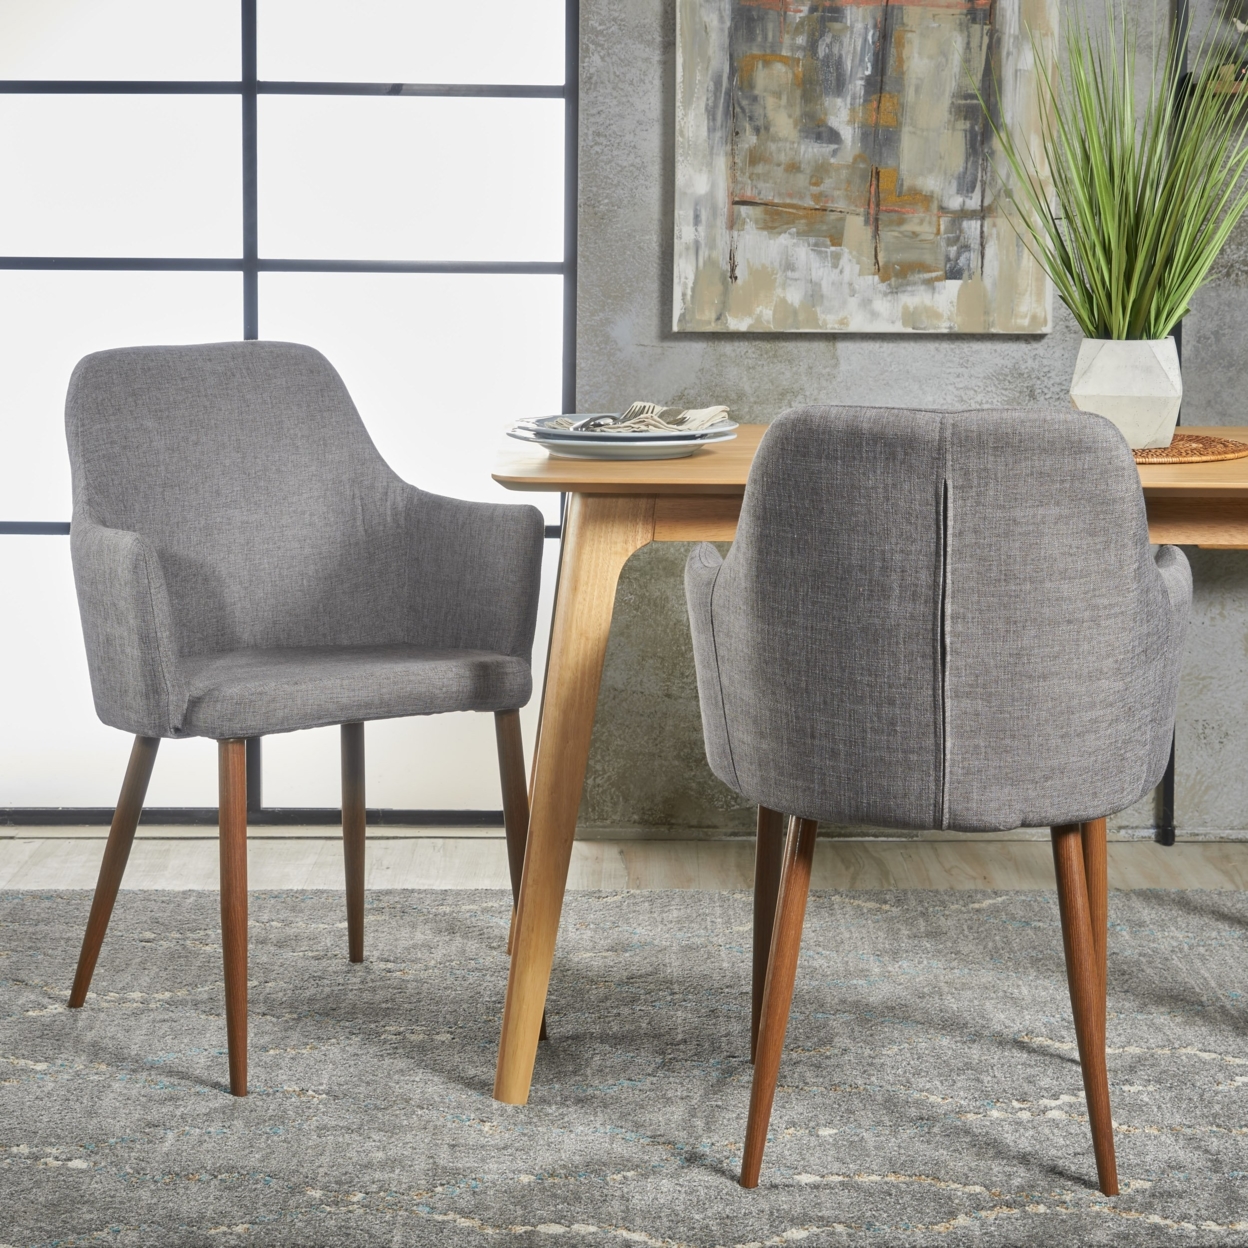 Serra Mid Century Fabric Dining Chair With Wood Finished Metal Legs (Set Of 2) - Muted Orange/Light Brown